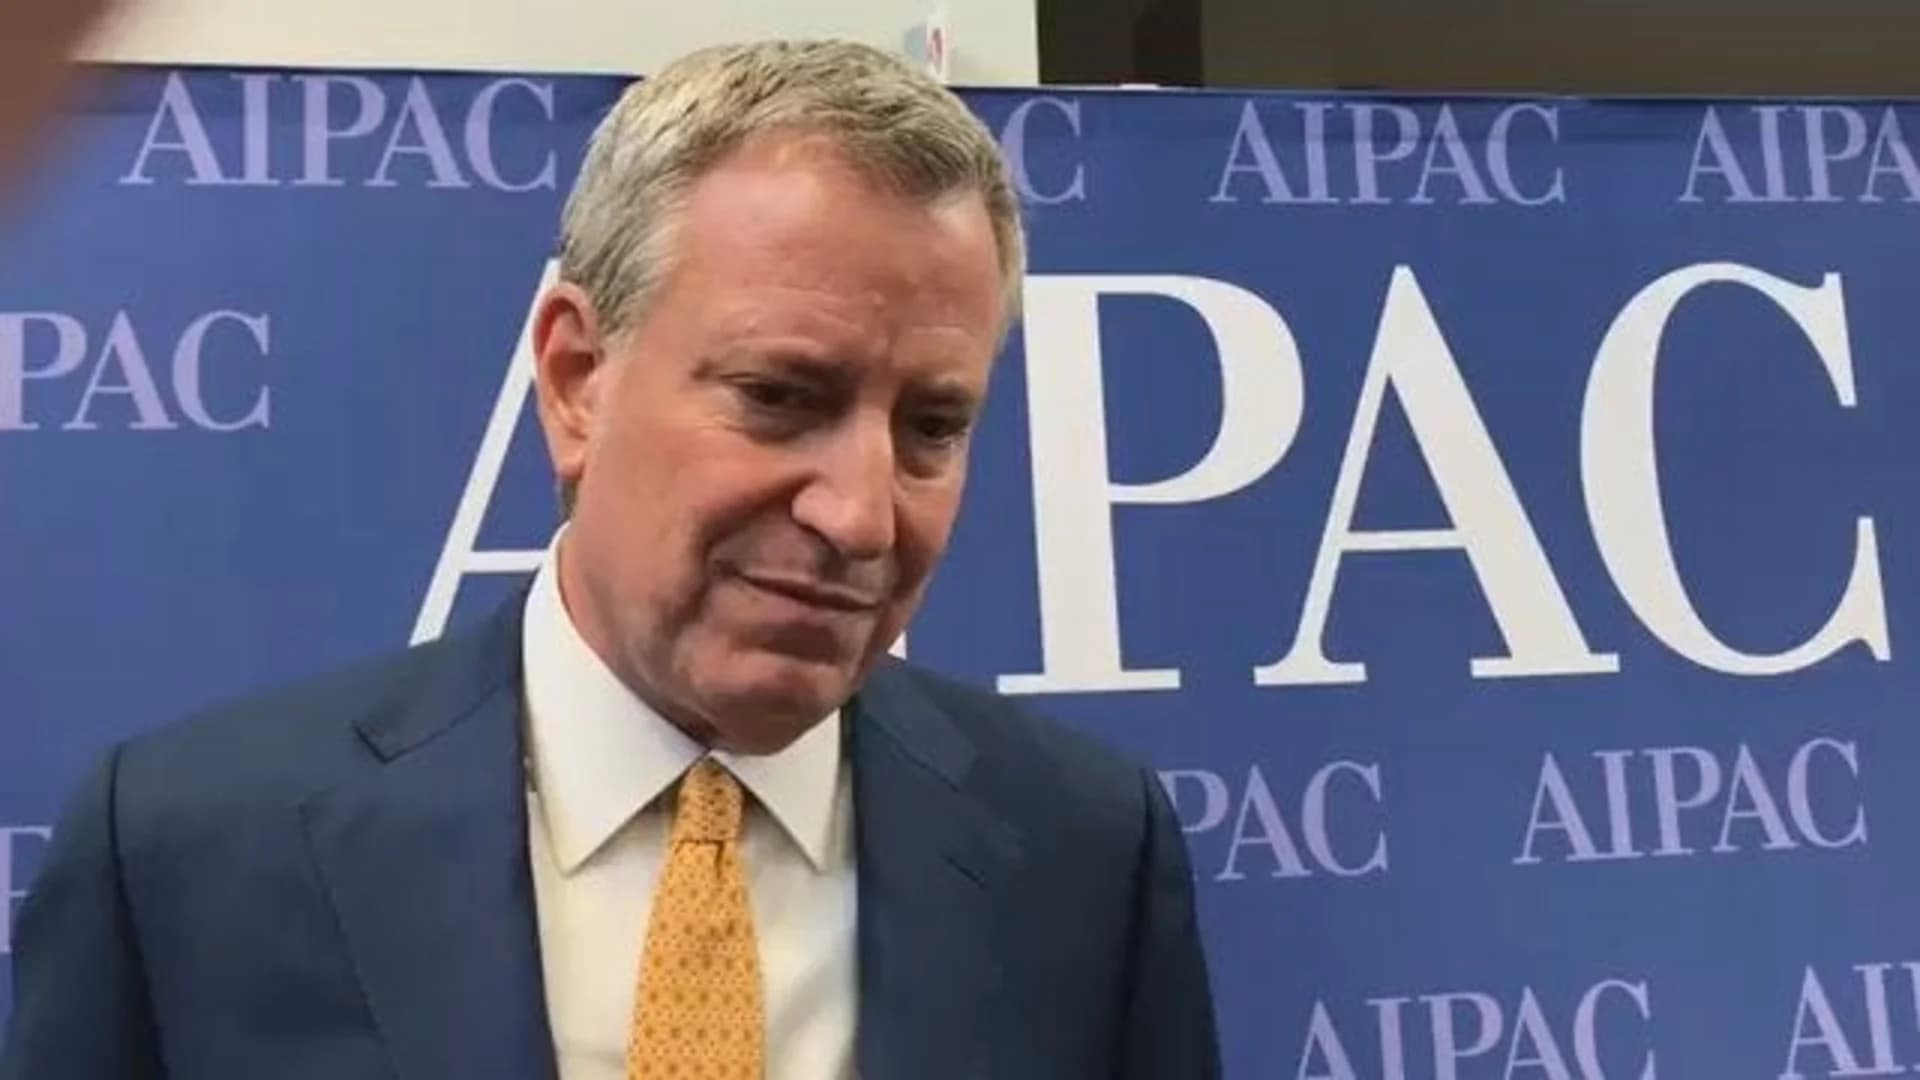 Interview with Mayor de Blasio from AIPAC - Courtesy i24 News